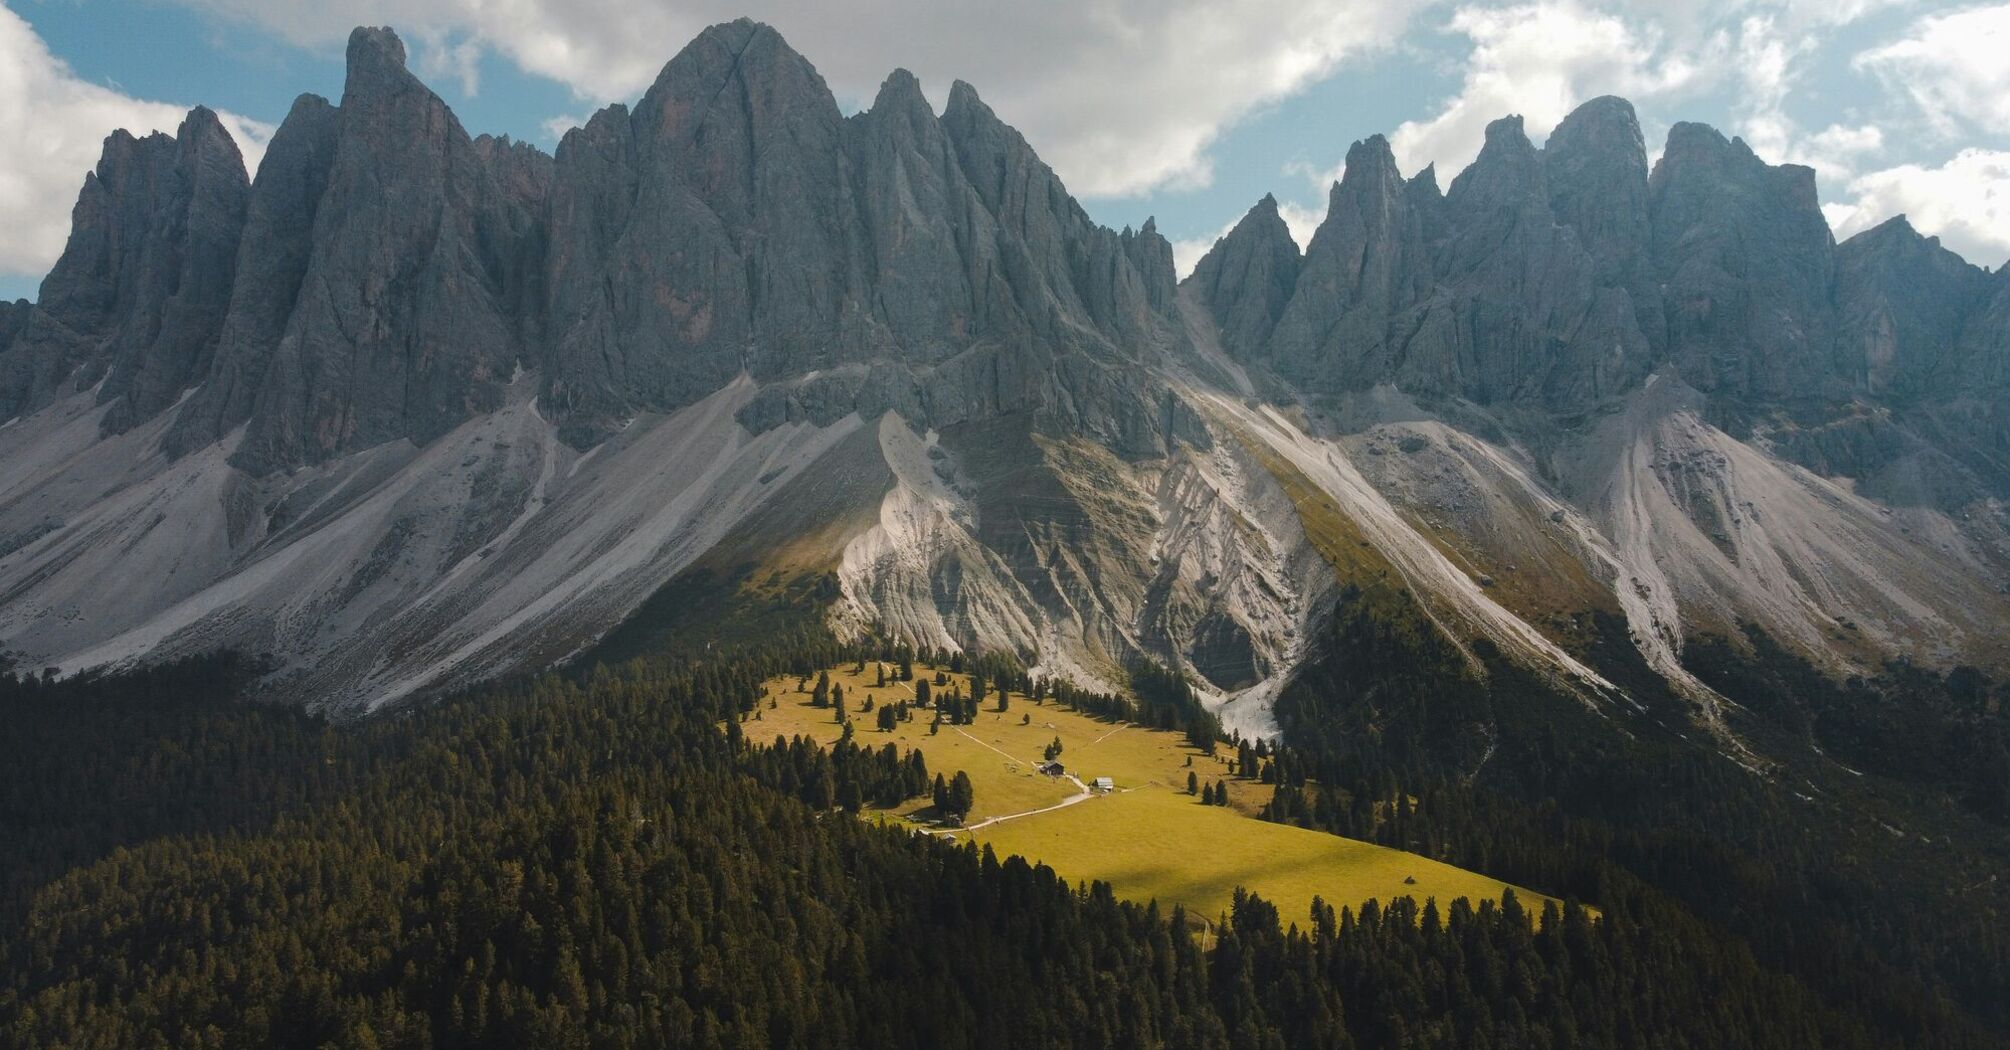 An aerial view of a Dolomites mountains range with trees